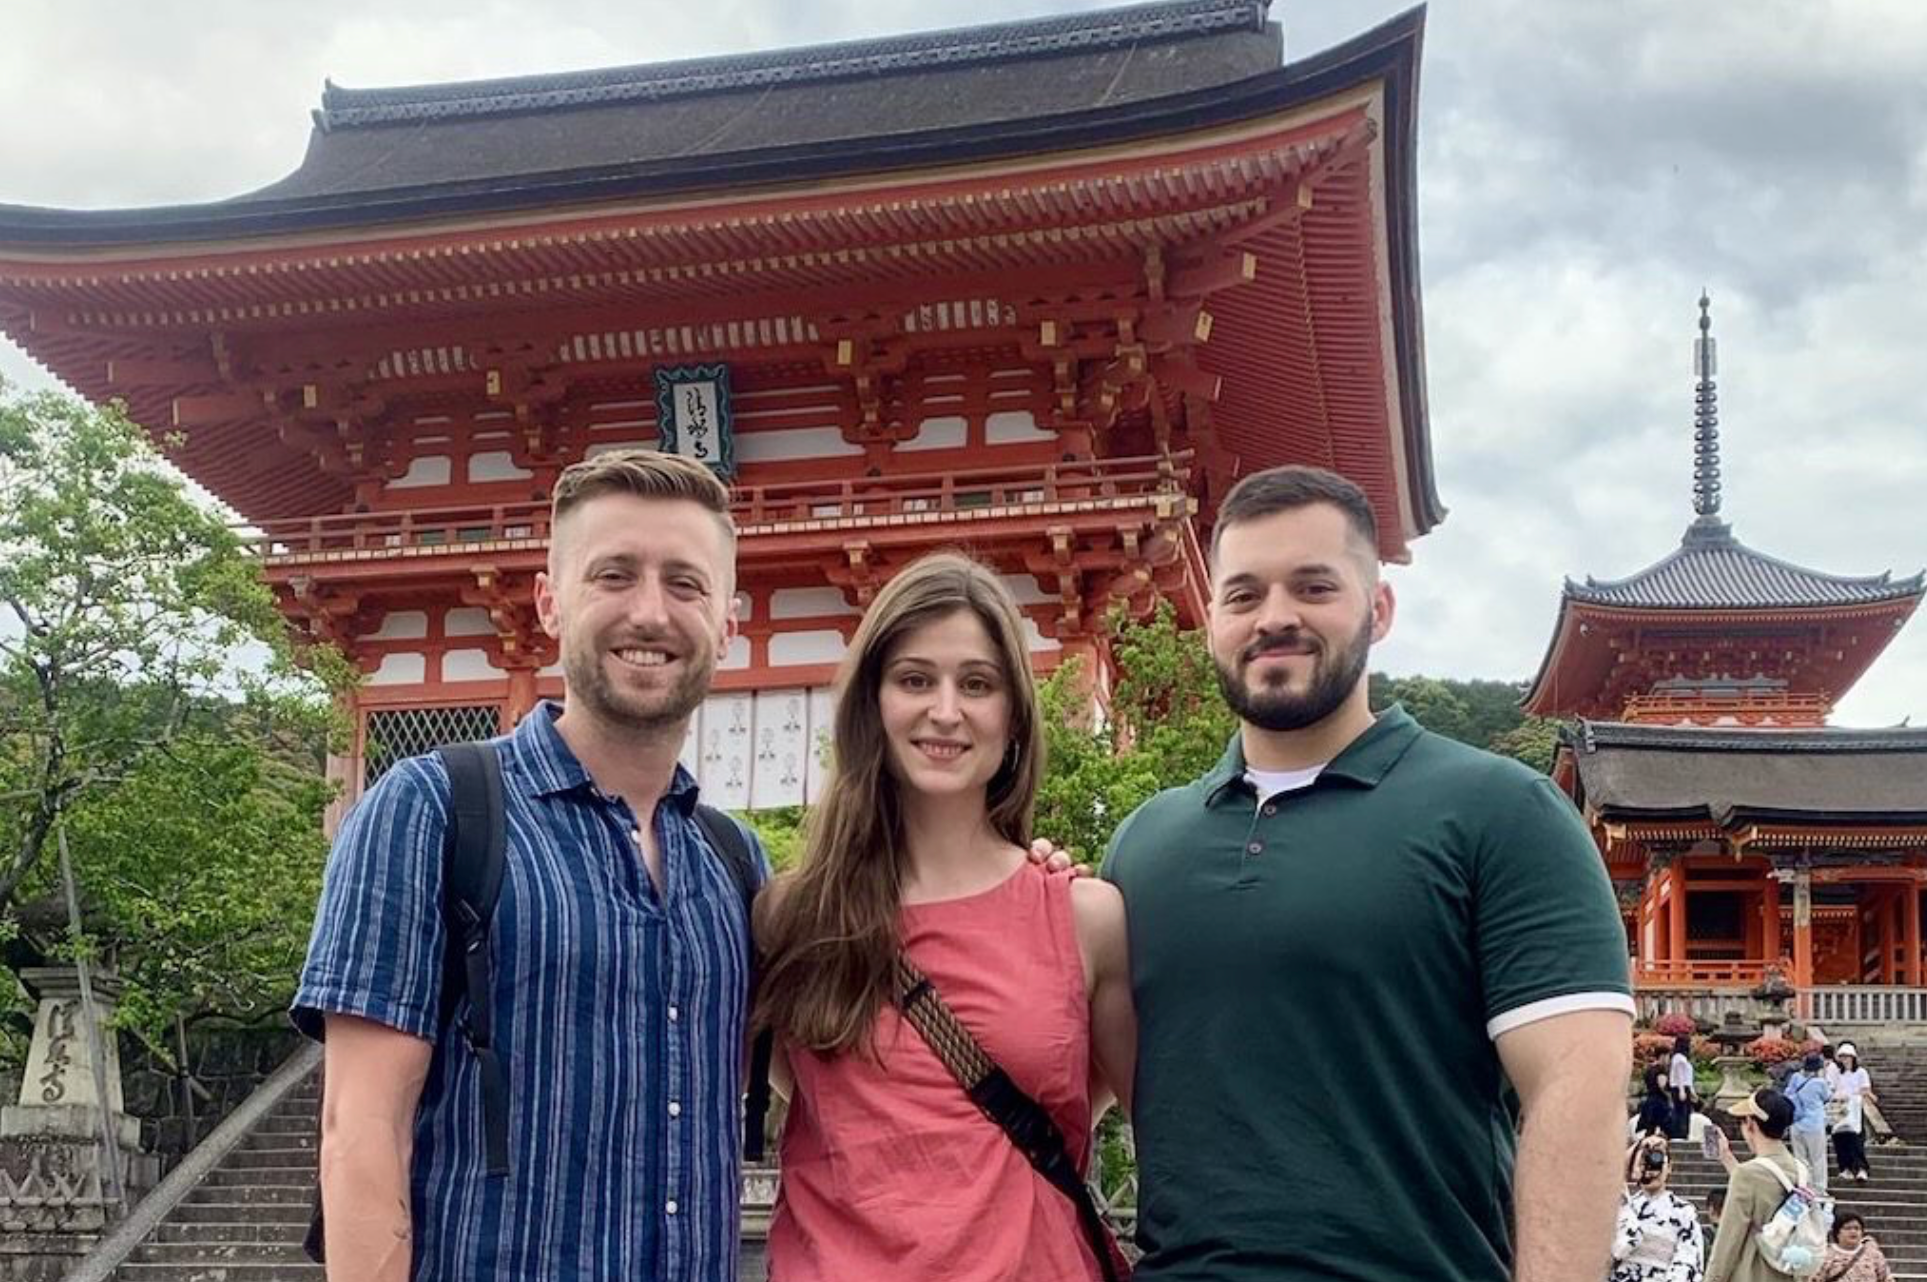 Three individuals pose for a photo in Japan